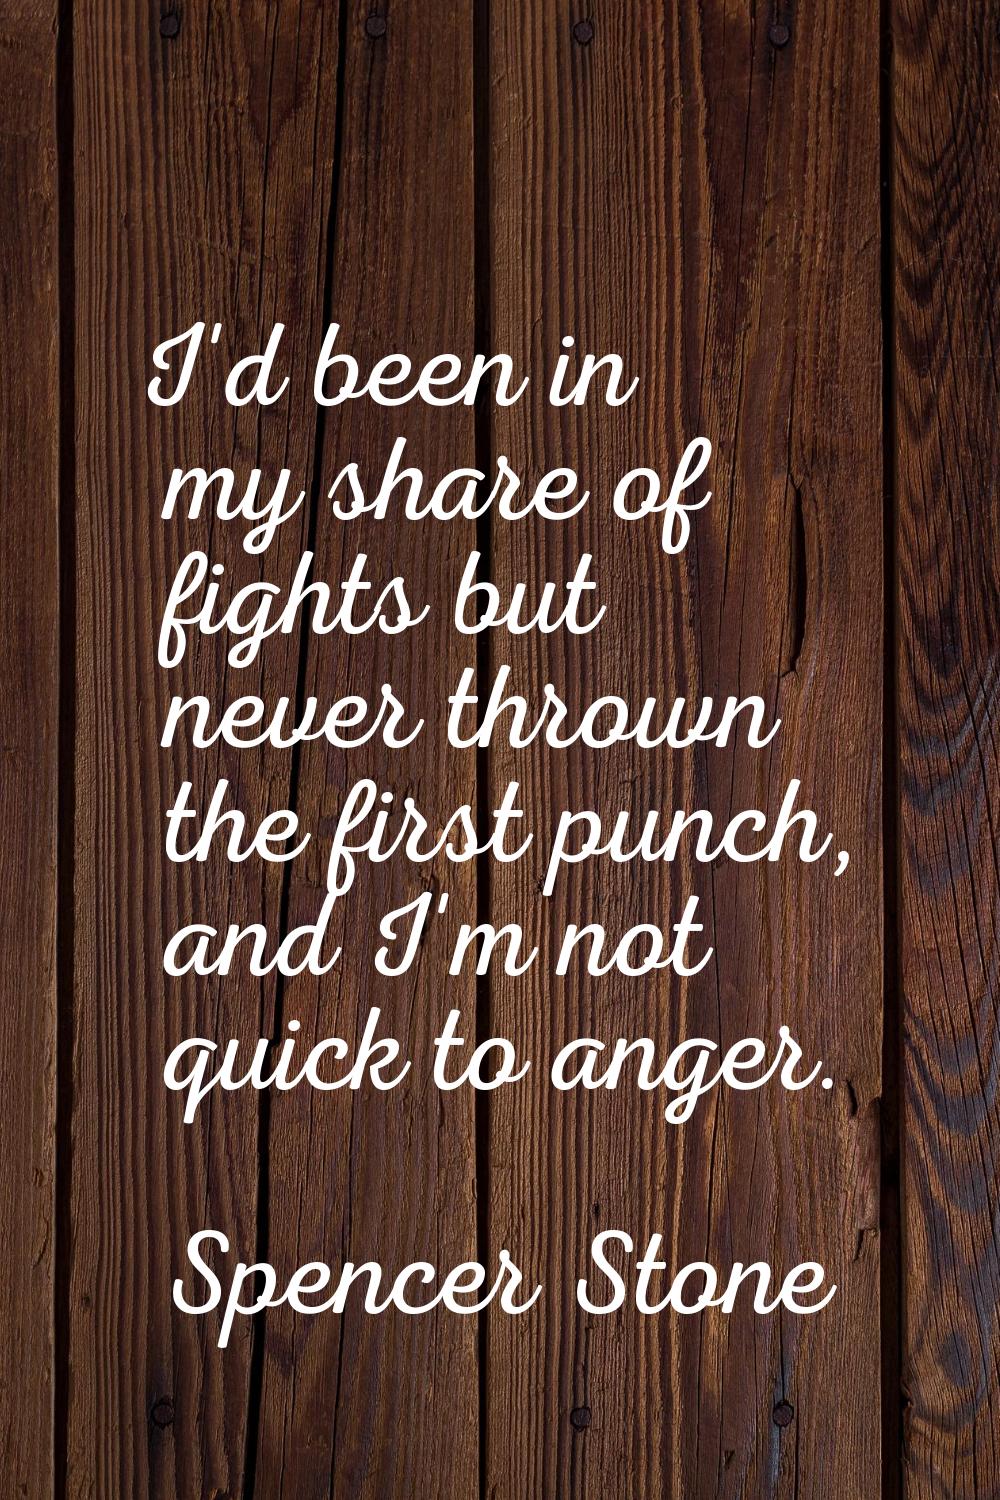 I'd been in my share of fights but never thrown the first punch, and I'm not quick to anger.